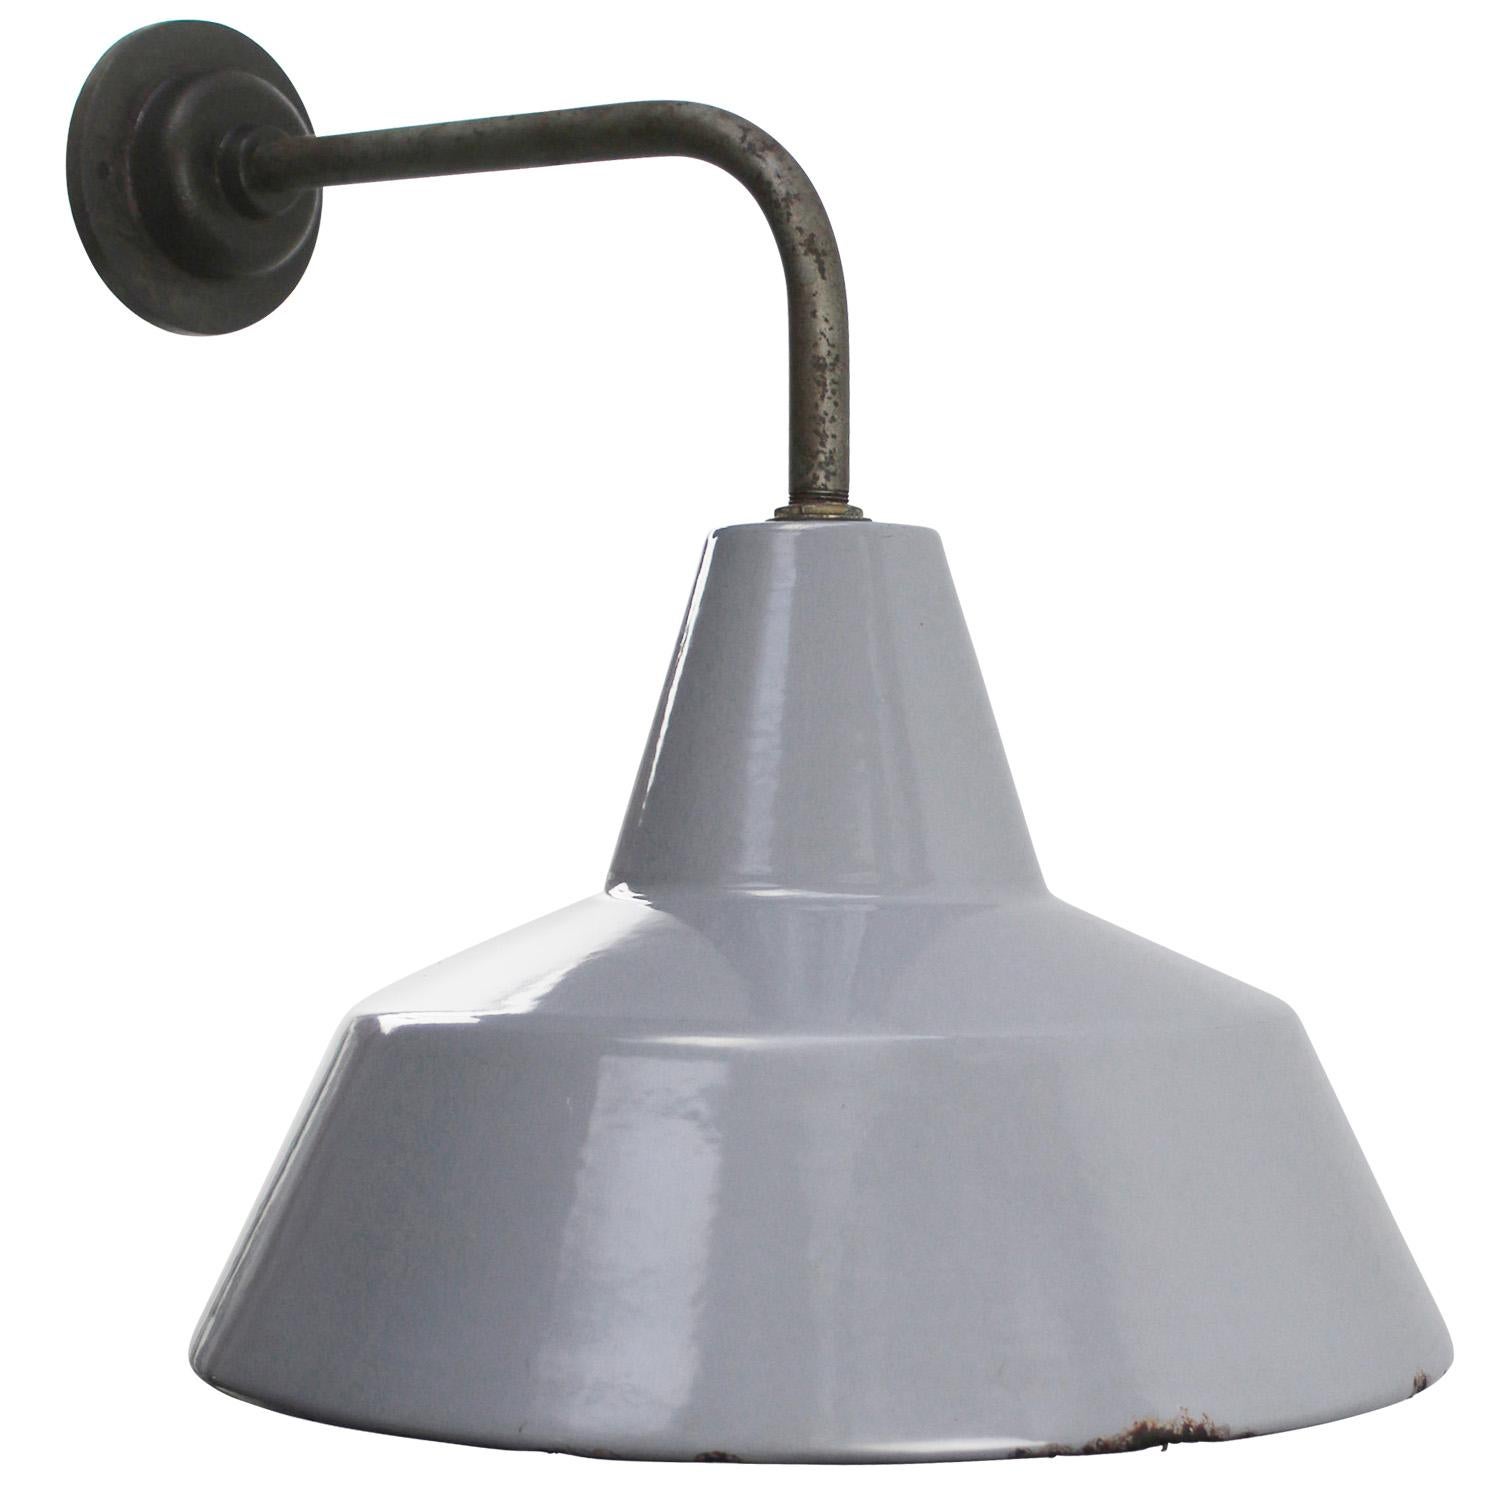 Dutch industrial wall lamp by Philips
grey enamel white interior

Diameter cast iron wall piece: 10.5 cm / 4 inches. 2 holes to secure

Weight: 2.20 kg / 4.9 lb

Priced per individual item. All lamps have been made suitable by international